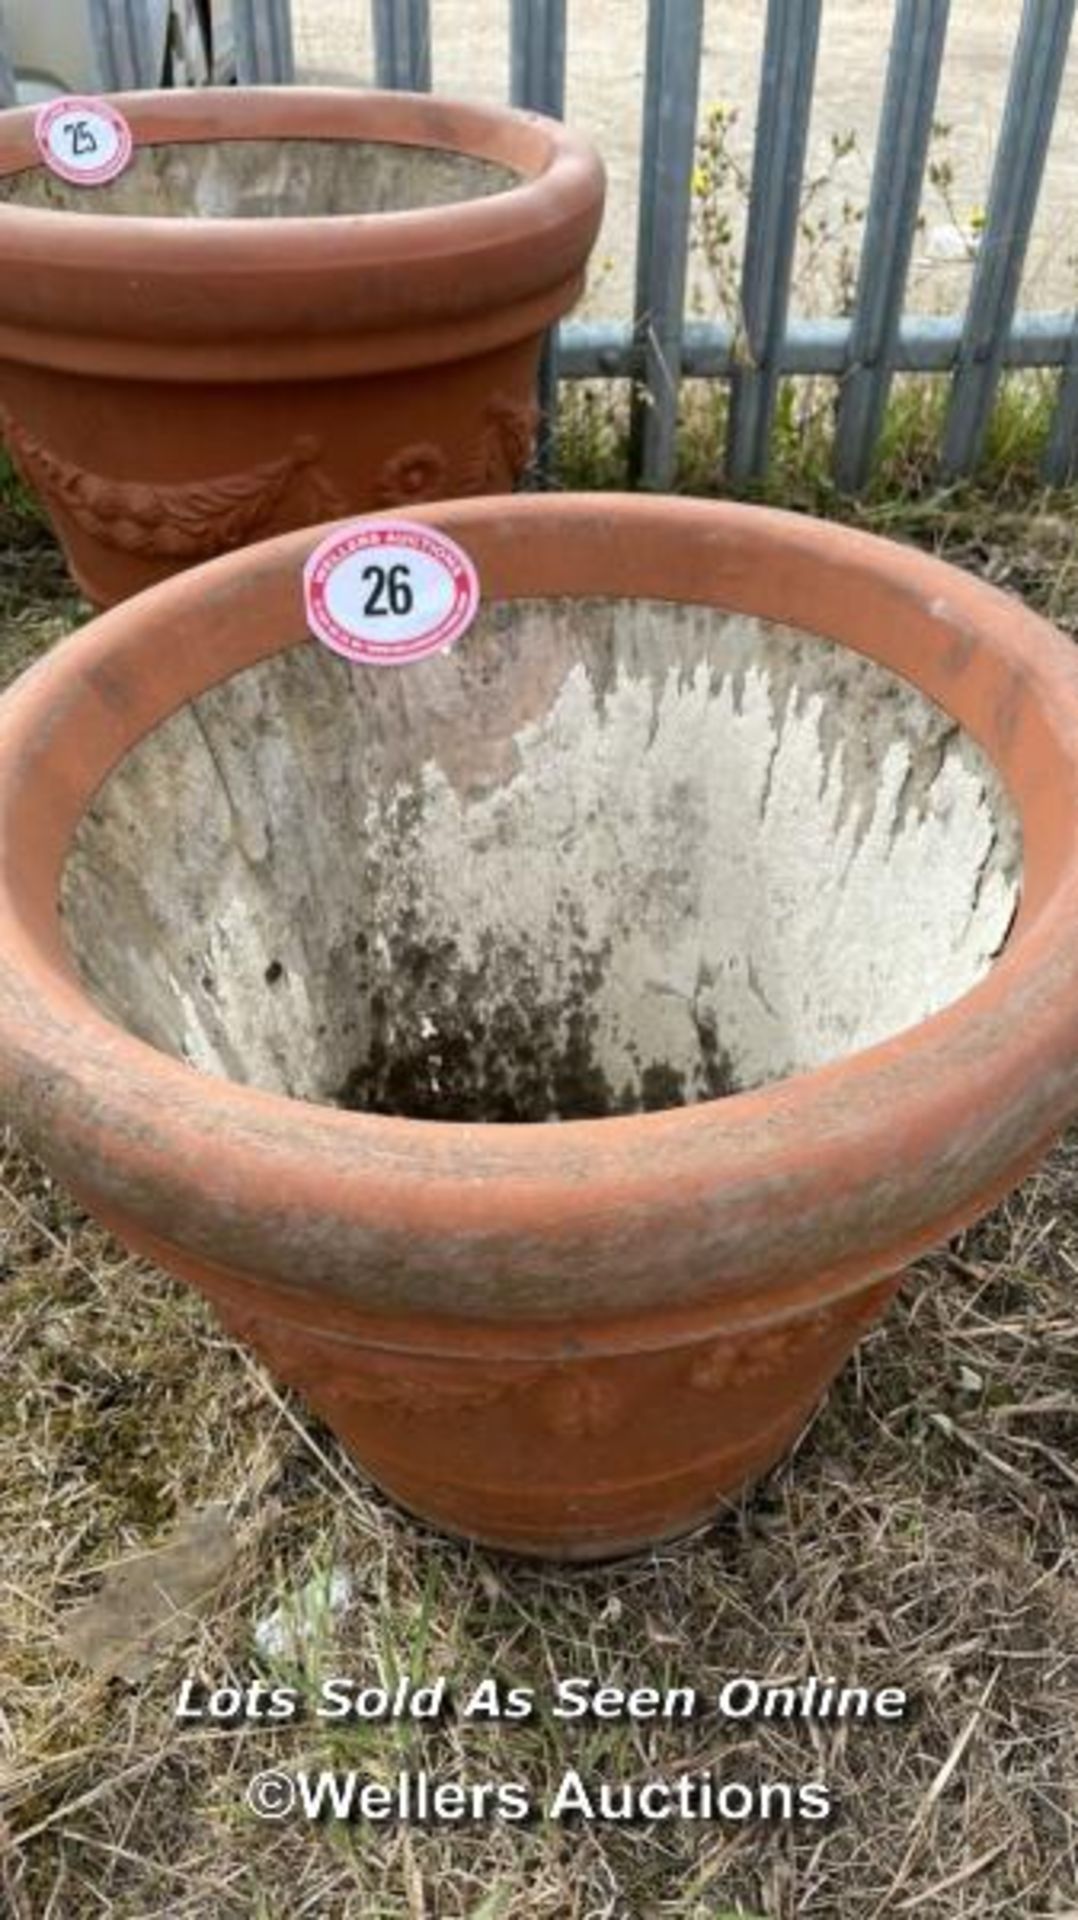 *PLANT POT, PLASTIC CASING WITH RECONSTITUTED STONE INNER, TERRACOTTA STYLE, 44CM (H) X 55CM (DIA) / - Image 2 of 3